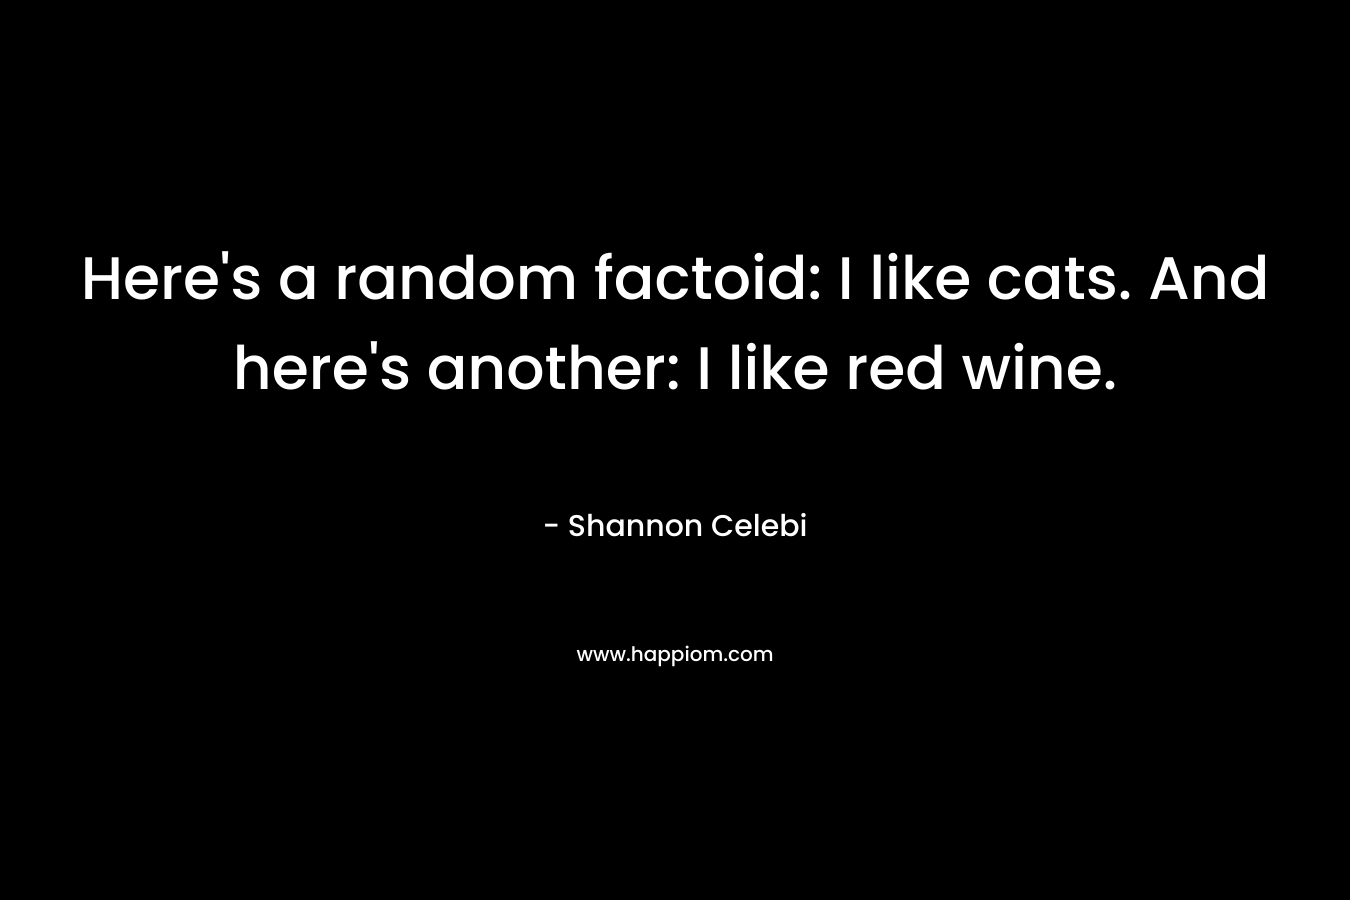 Here’s a random factoid: I like cats. And here’s another: I like red wine. – Shannon Celebi